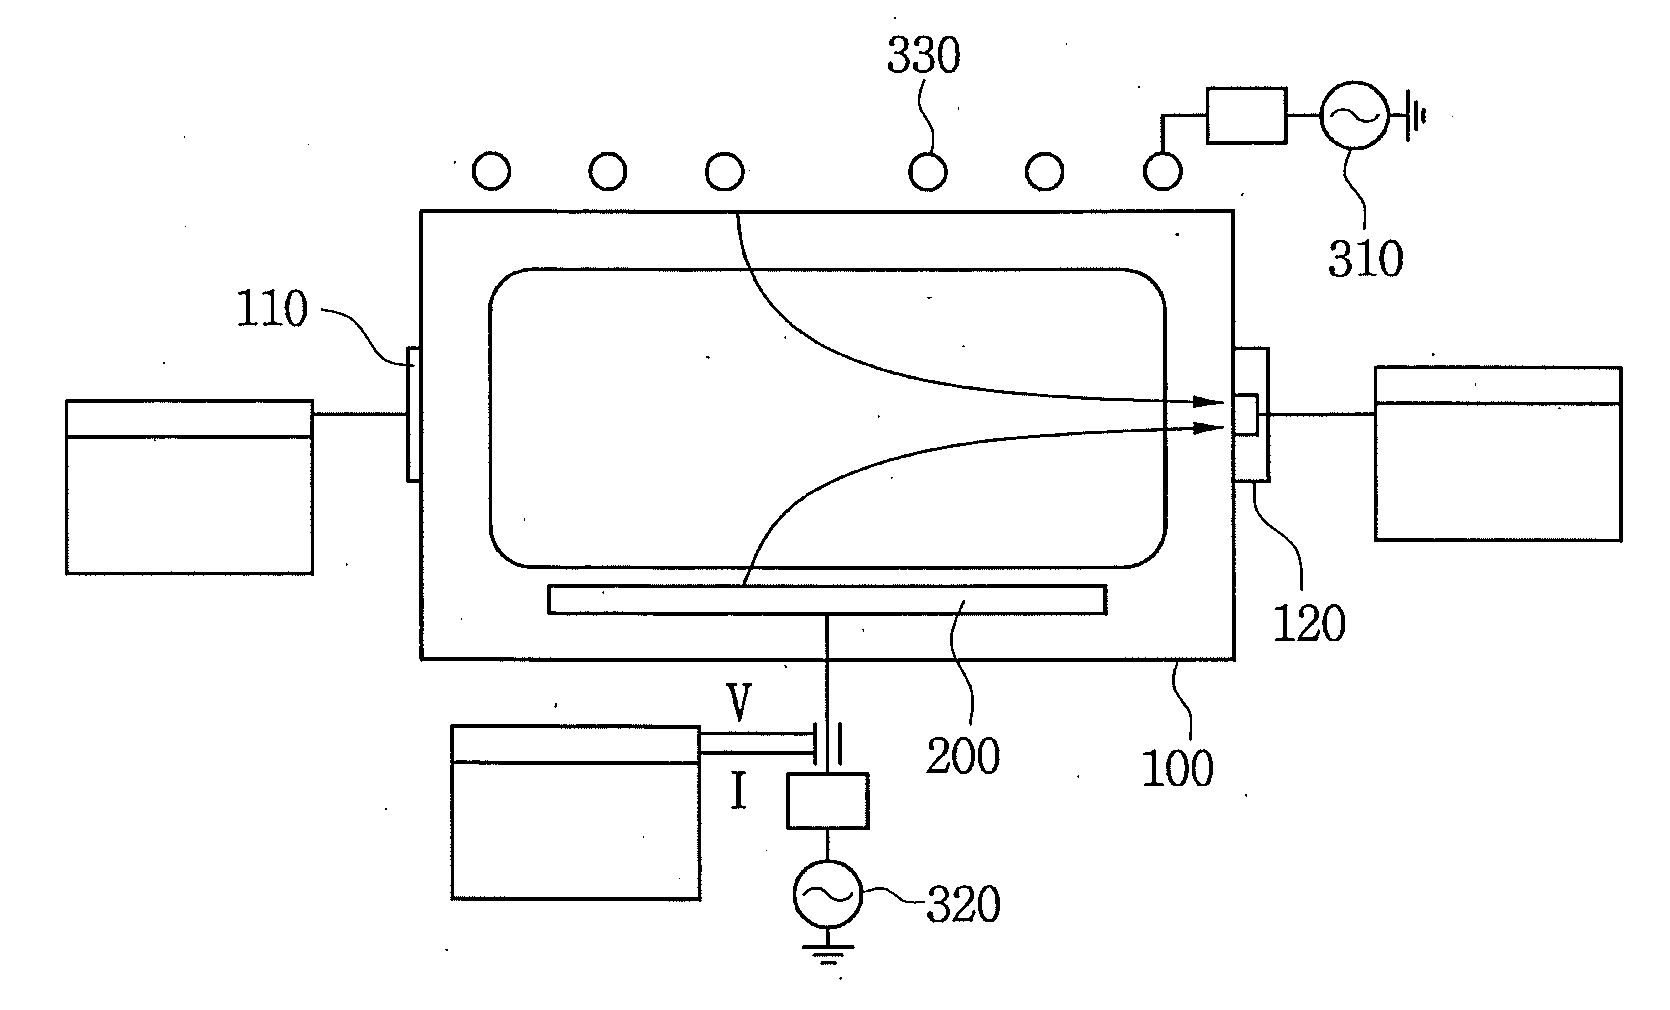 Methods of Selecting Sensors for Detecting Abnormalities in Semiconductor Manufacturing Processes